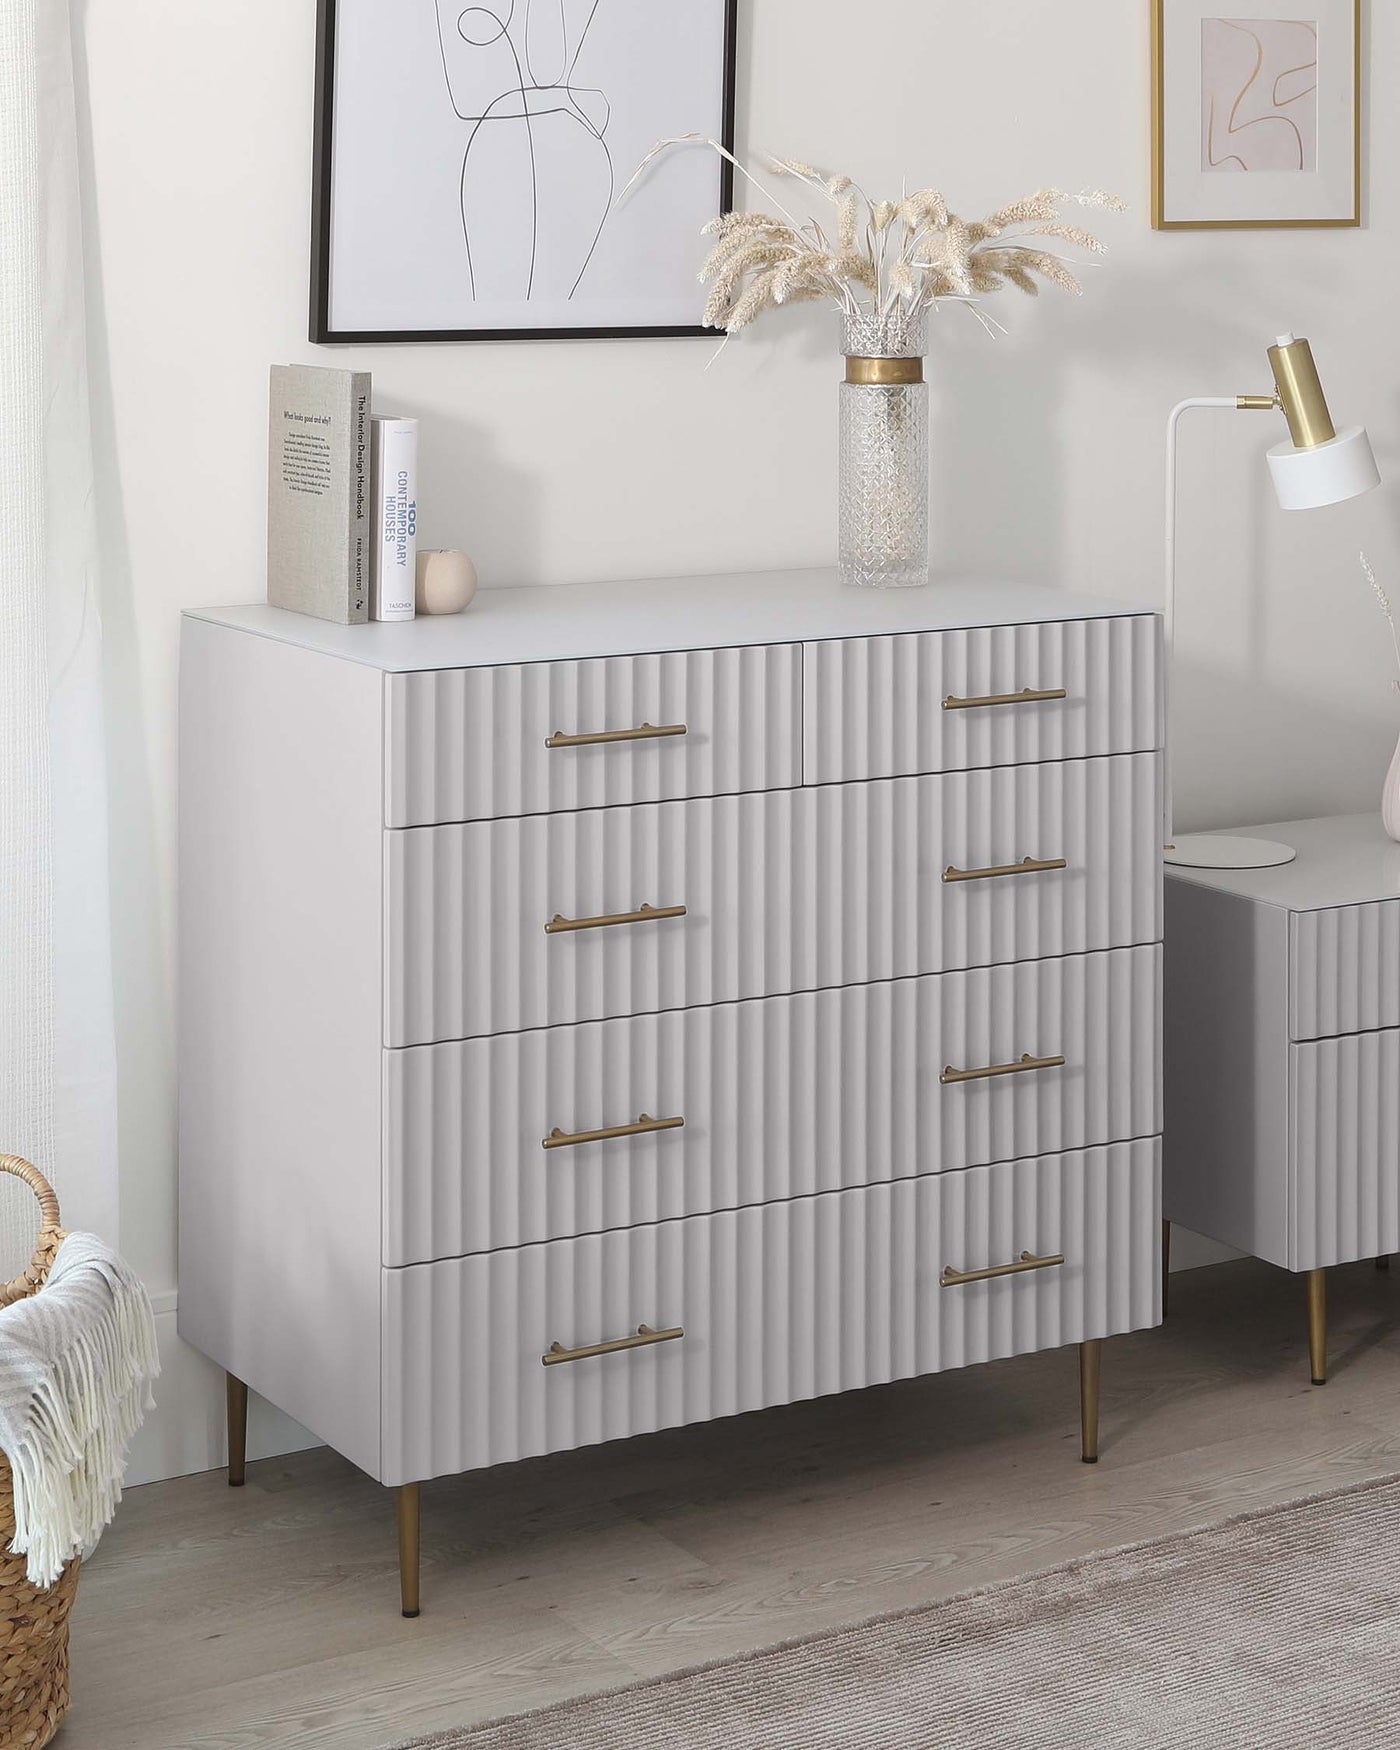 Modern grey fluted dresser with brass handles and matching bedside table, set in a stylish room with neutral decor.